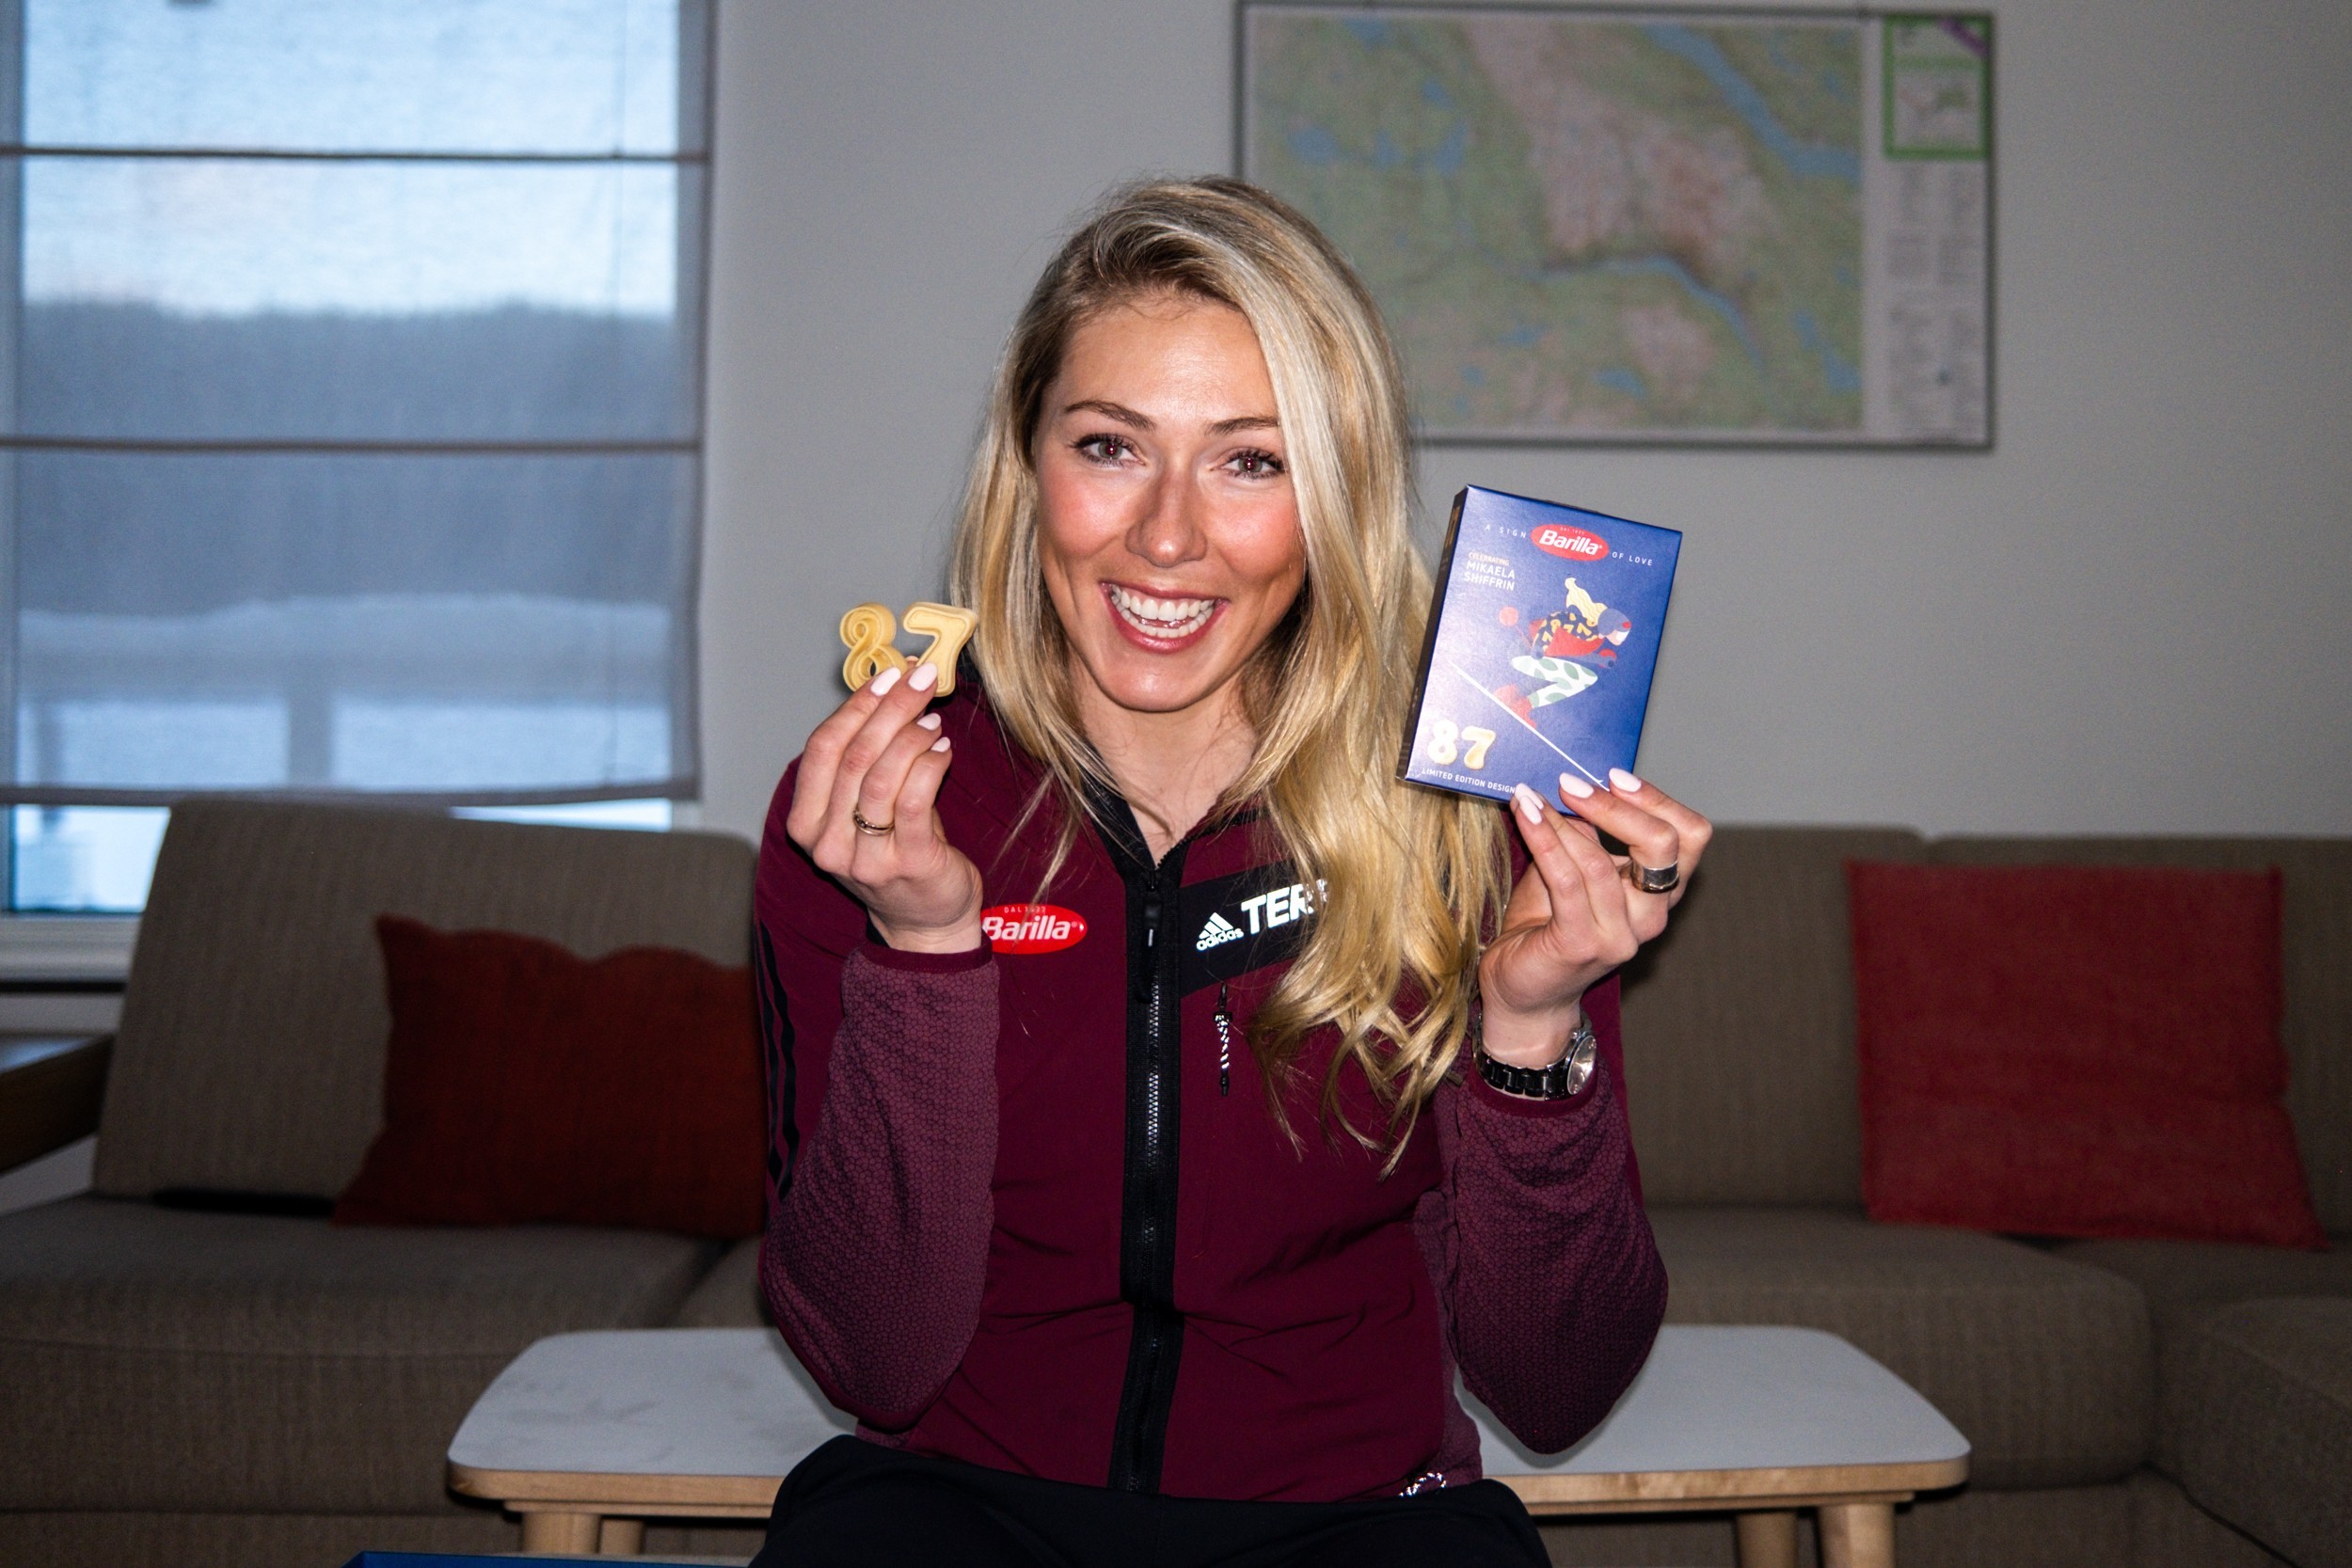 Barilla & Mikaela Shiffrin: Greatness starts with a great recipe - Pack No. 65